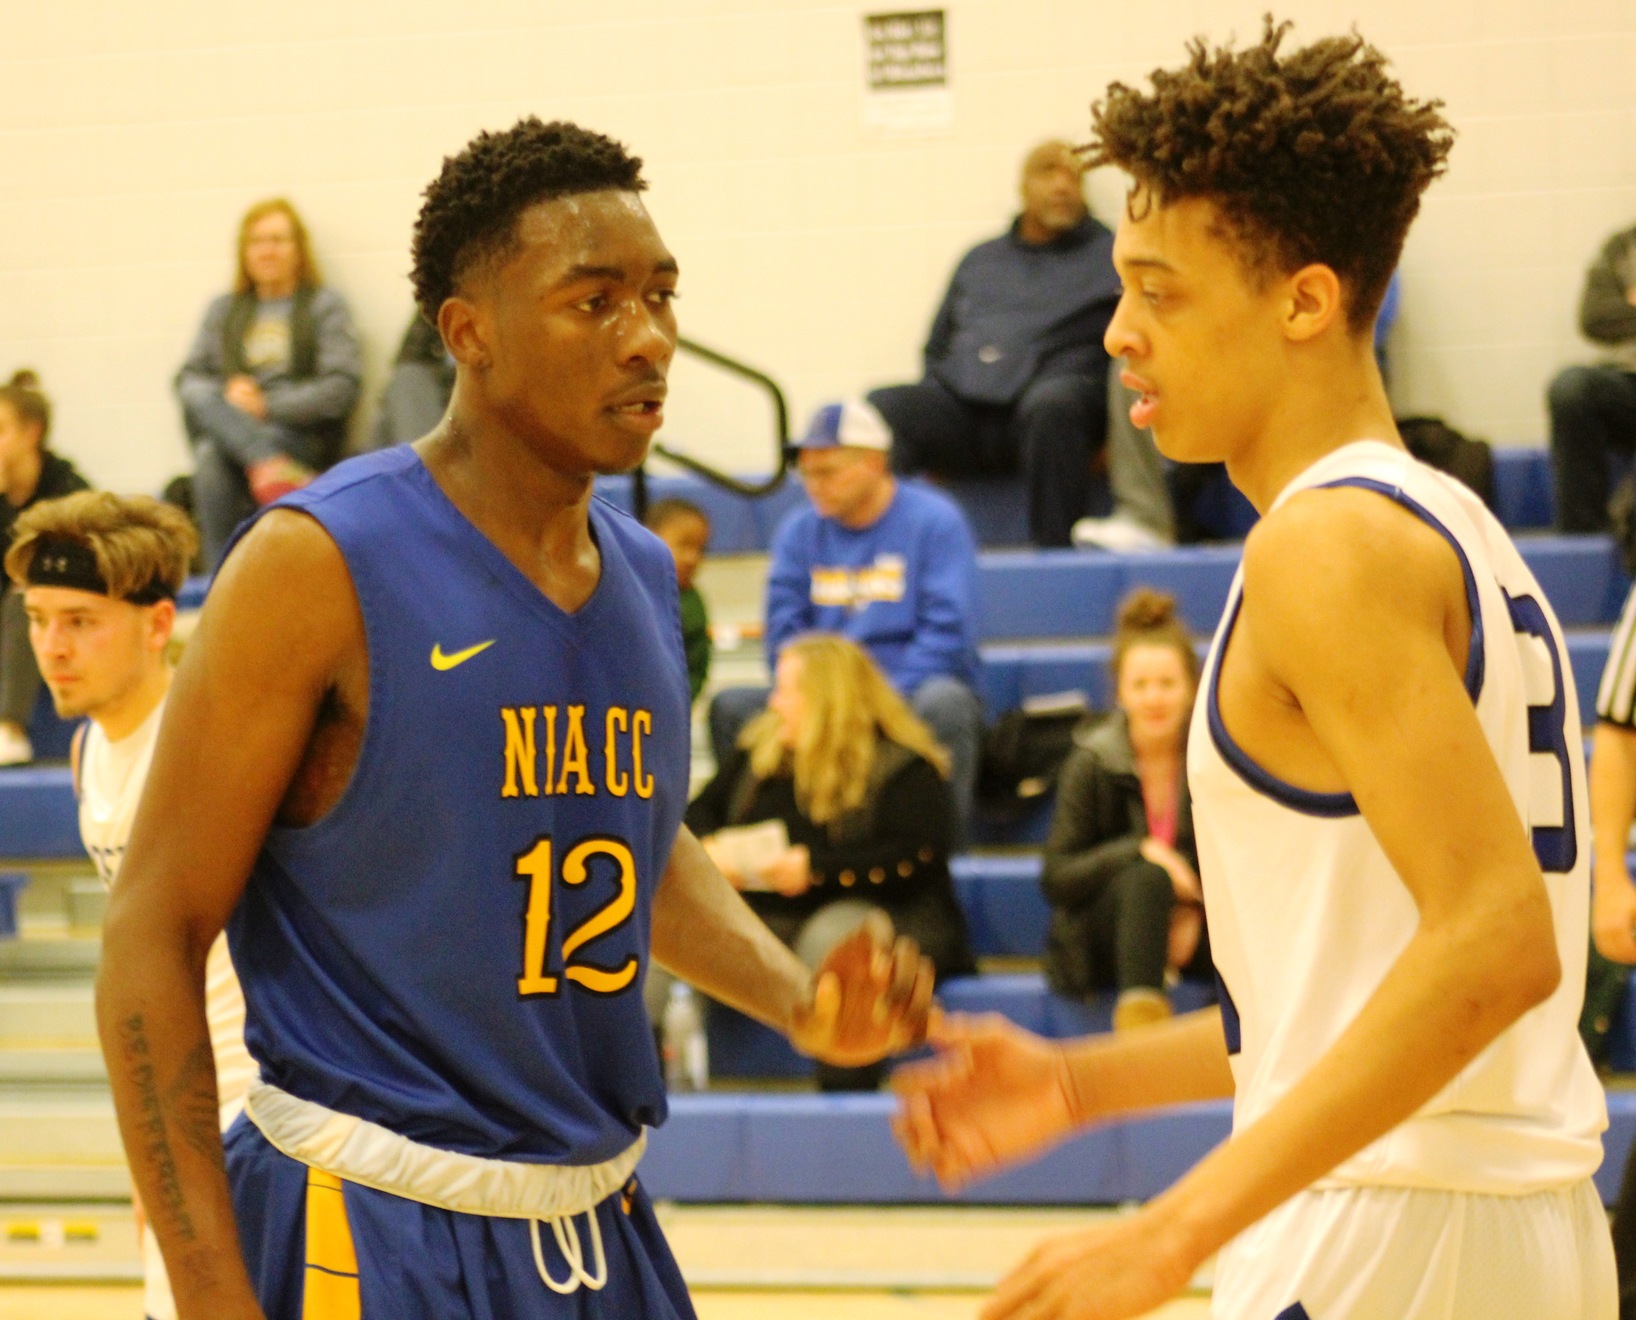 NIACC's Wendell Matthews is the NJCAA Division II player of the week for the week of Nov. 26-Dec. 2.